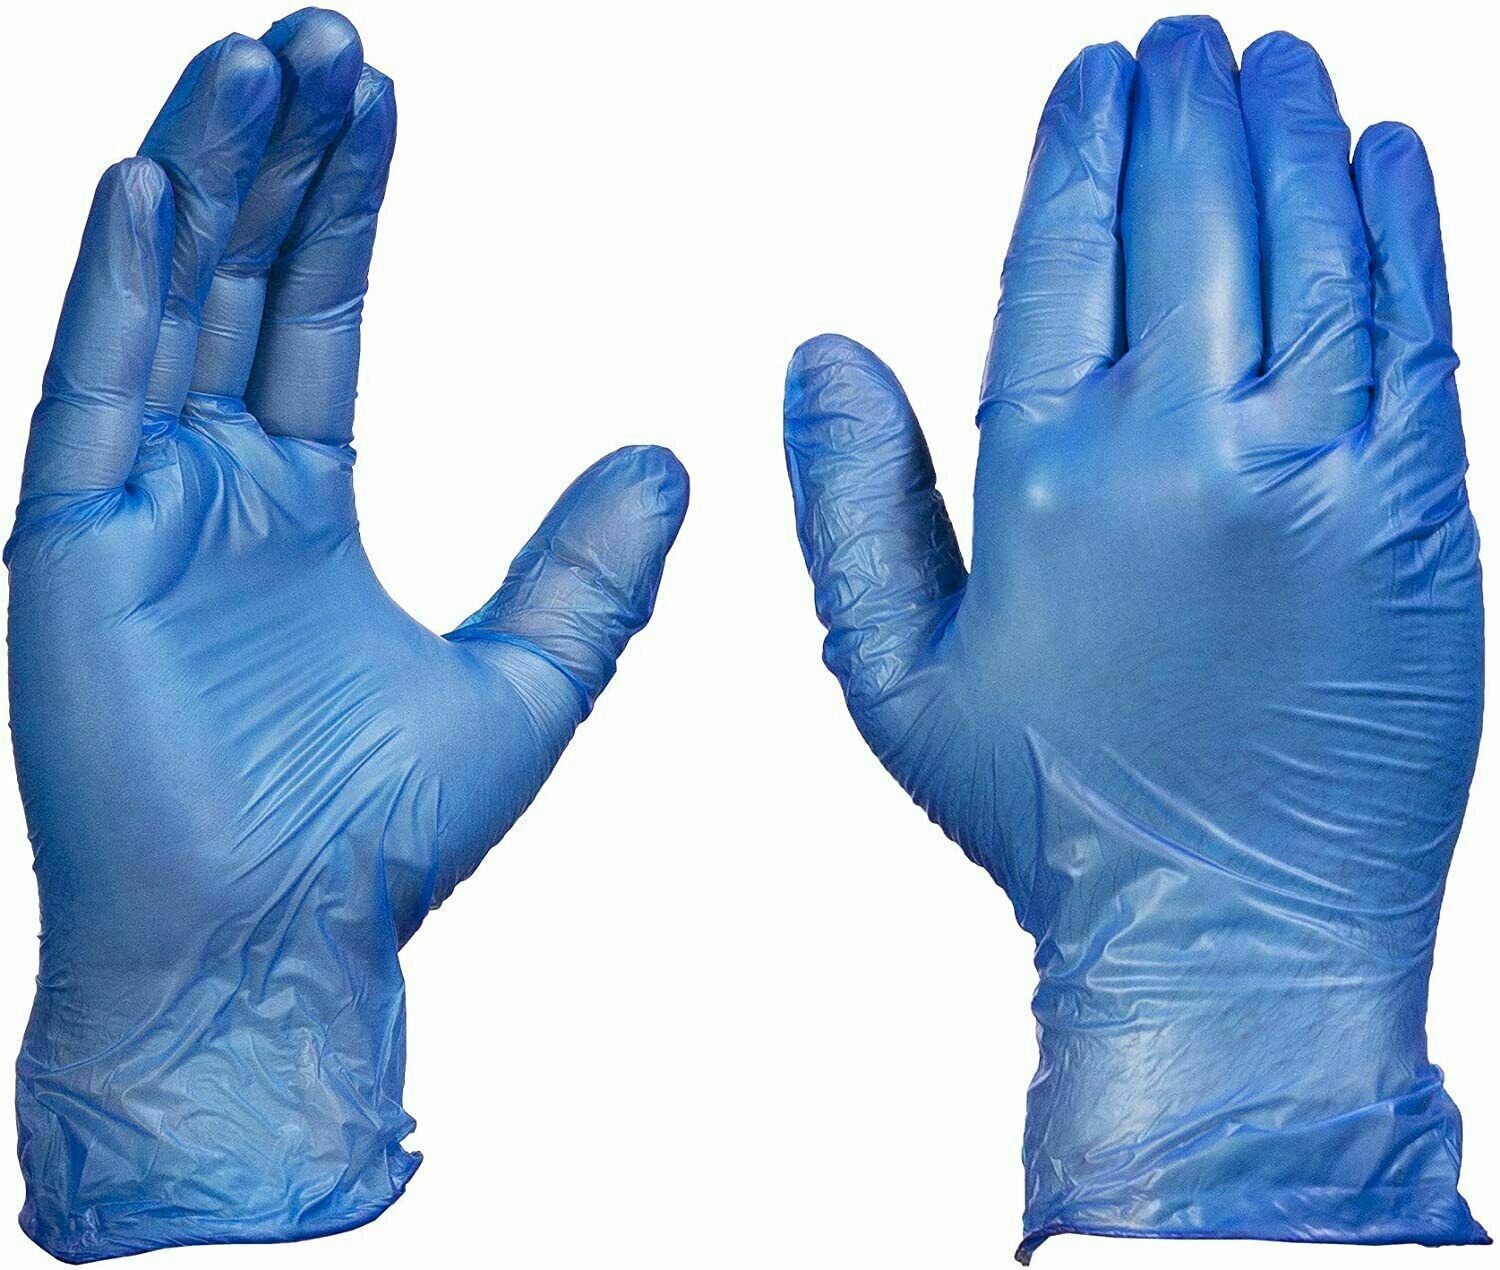 Industrial Blue Vinyl Gloves [Latex+Powder Free] Disposable Box of 100